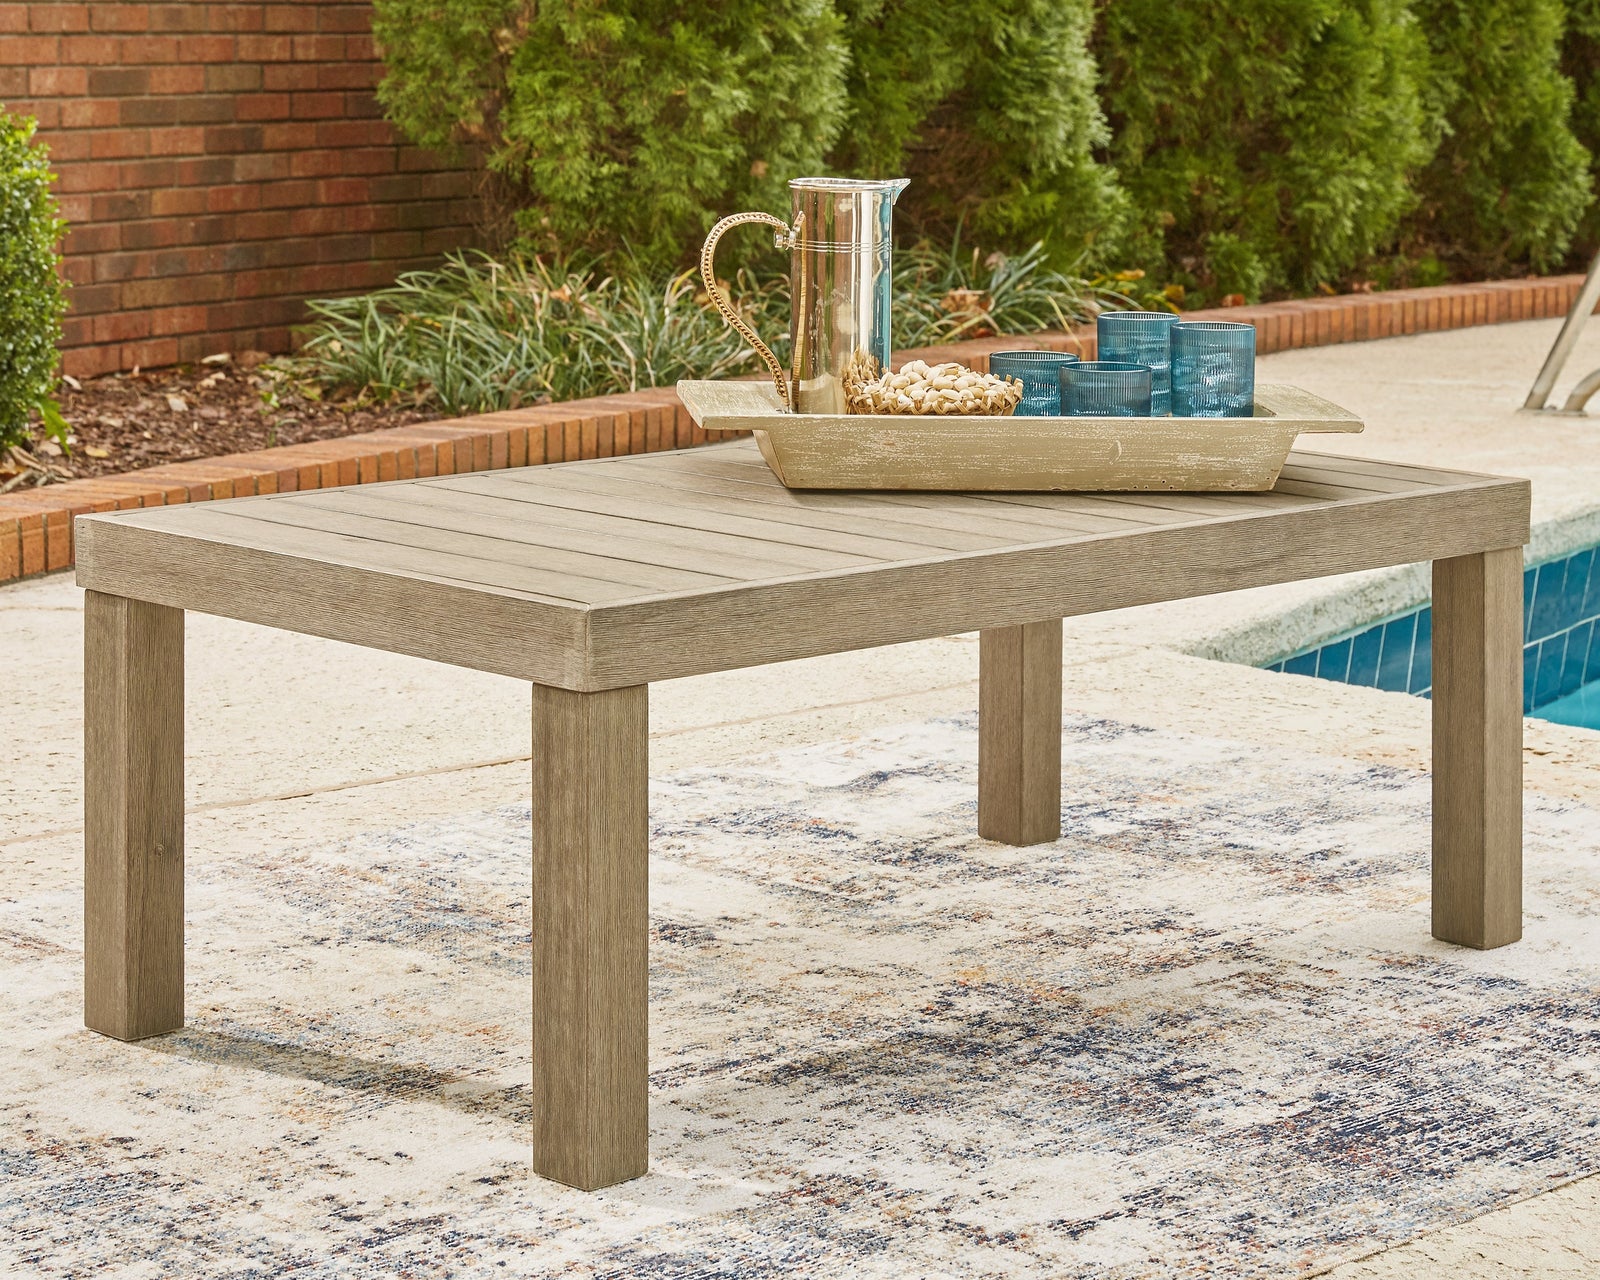 Silo Point Brown Outdoor Coffee Table